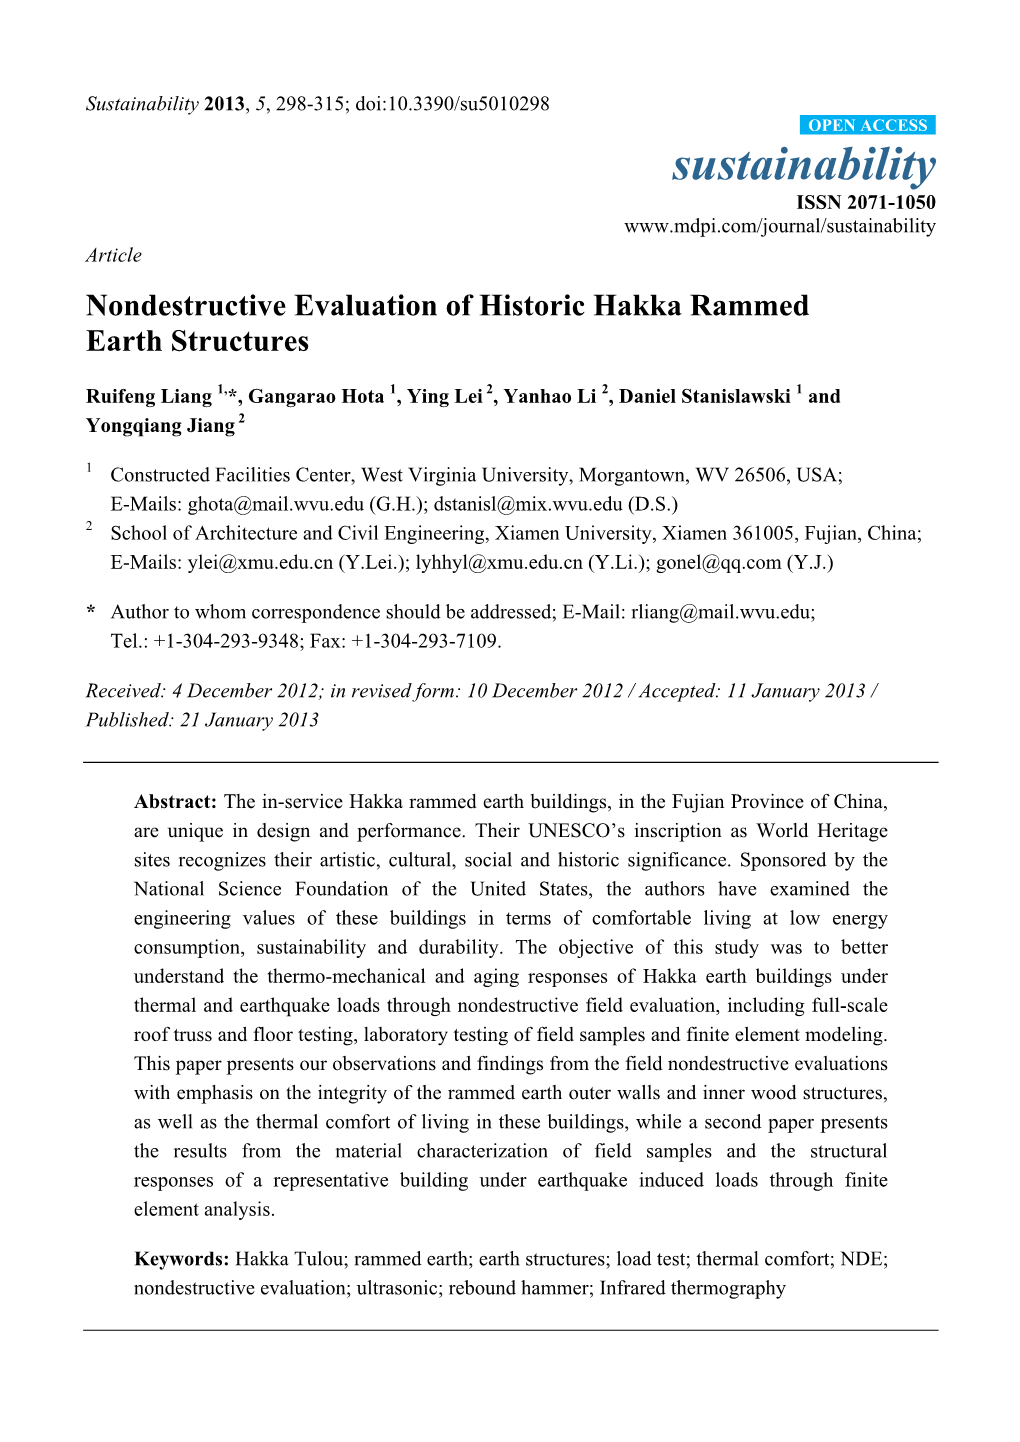 Nondestructive Evaluation of Historic Hakka Rammed Earth Structures